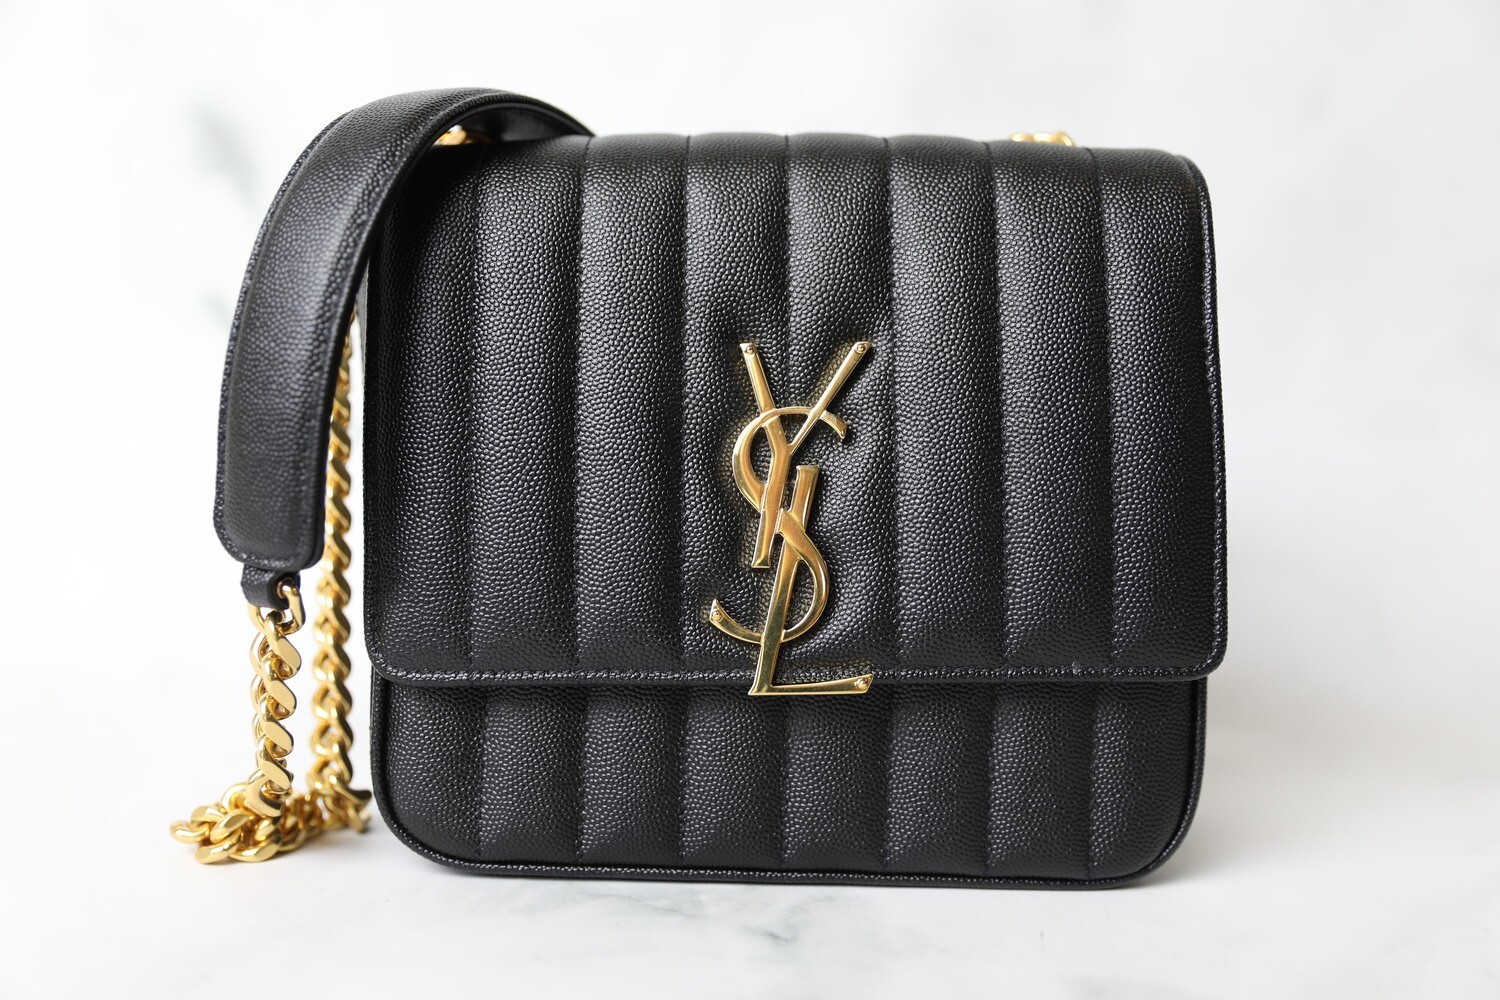 Saint Laurent Vicky Small, Black Pebbled Leather with Gold Hardware, Preowned in Dustbag WA001